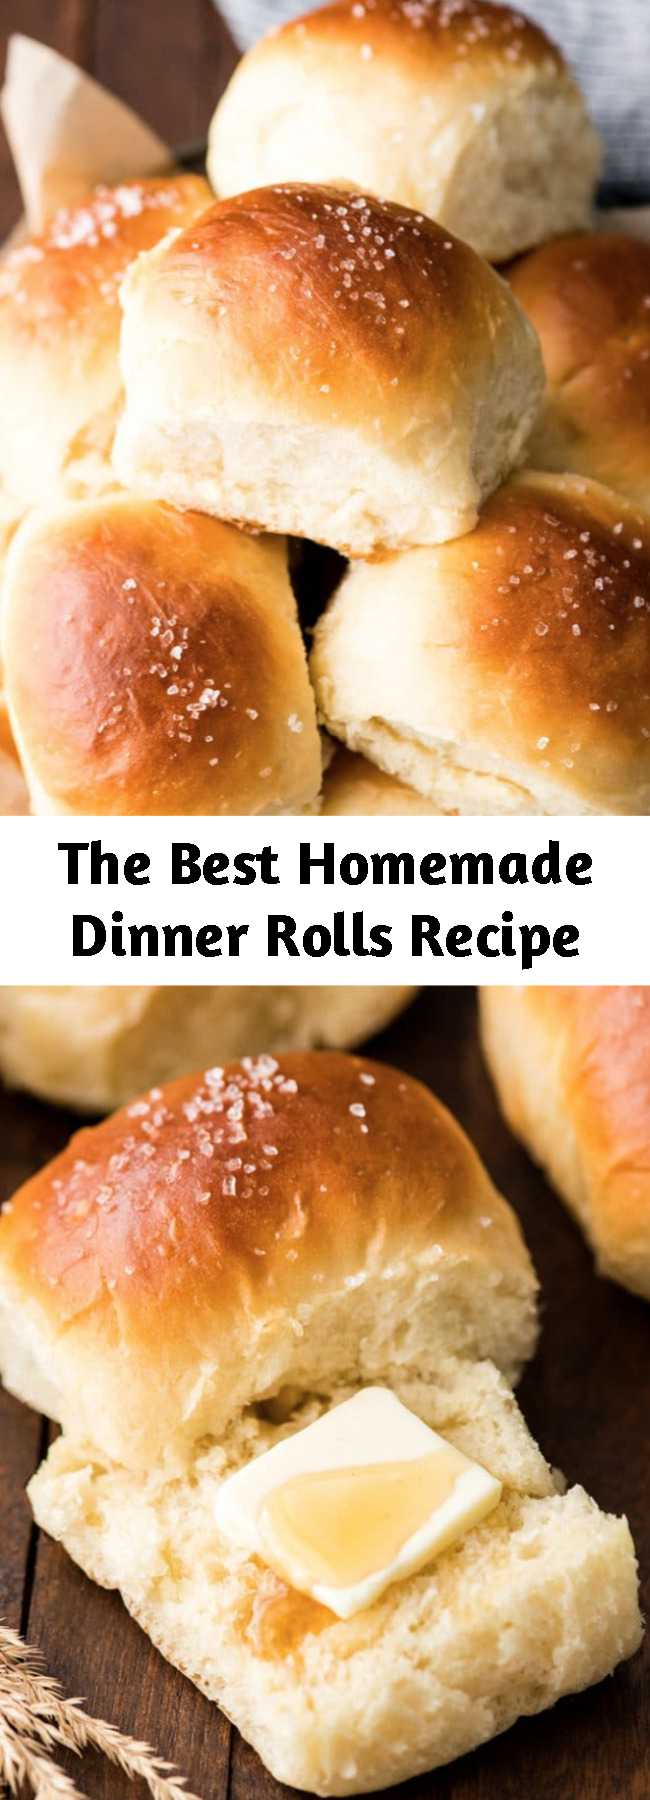 The Best Homemade Dinner Rolls Recipe - This Best Homemade Dinner Rolls recipe turns out perfectly every time. These easy, soft & fluffy dinner rolls are, slightly sweet and salty, irresistibly buttery and made from scratch!! #fromscratch #dinnerrolls #bestdinnerrolls #fluffydinnerrolls #softdinnerrolls